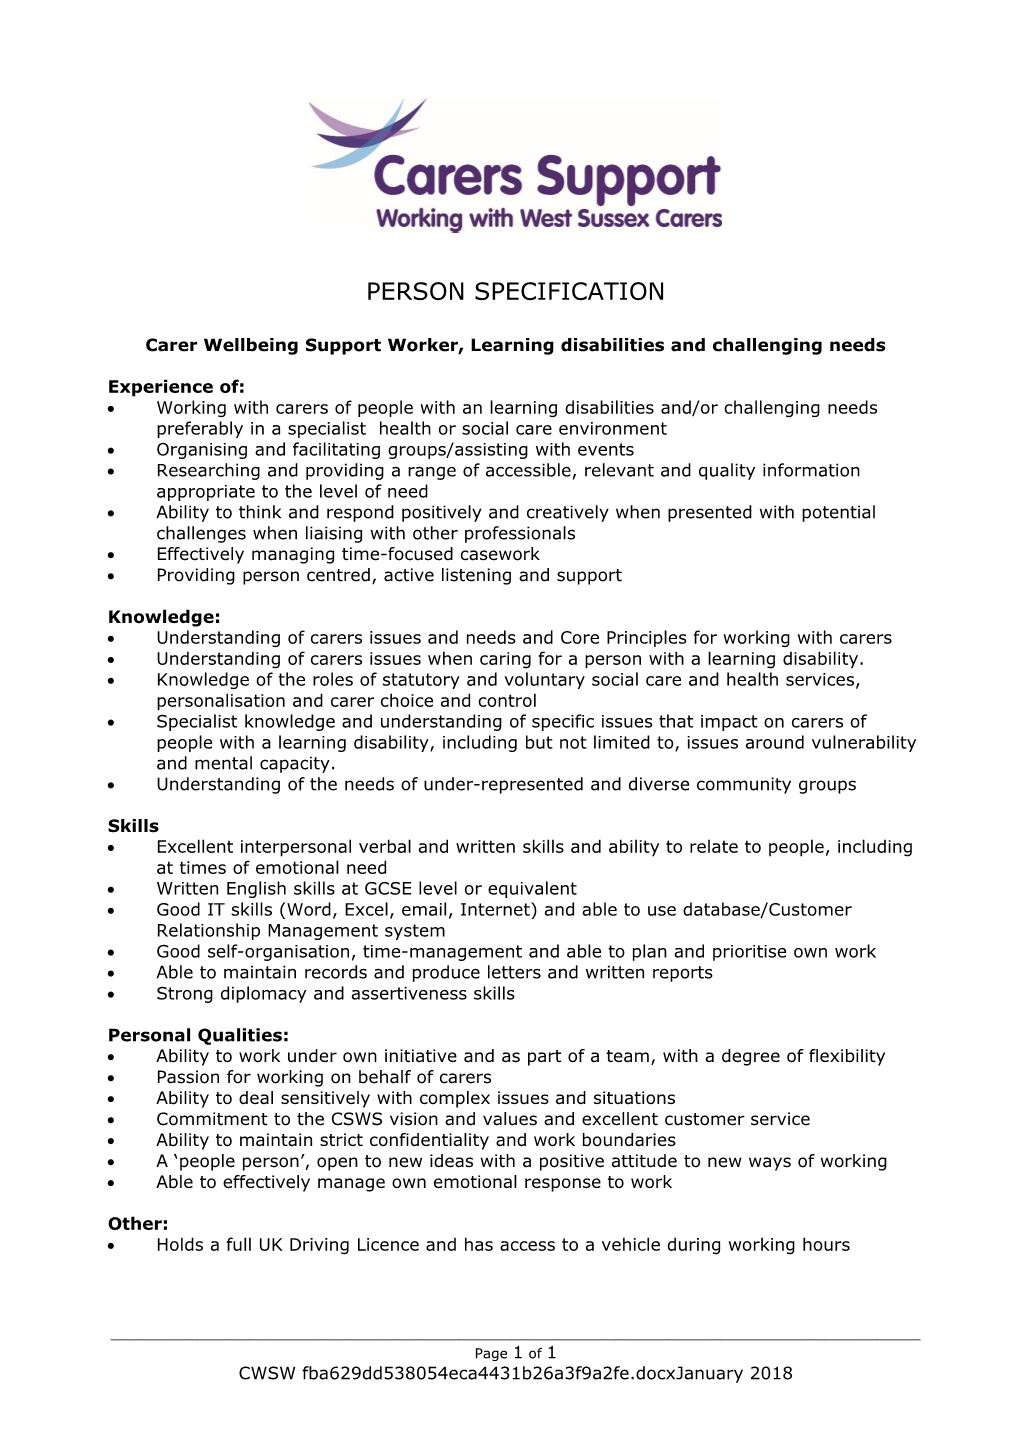 Carer Wellbeing Support Worker, Learning Disabilities and Challenging Needs